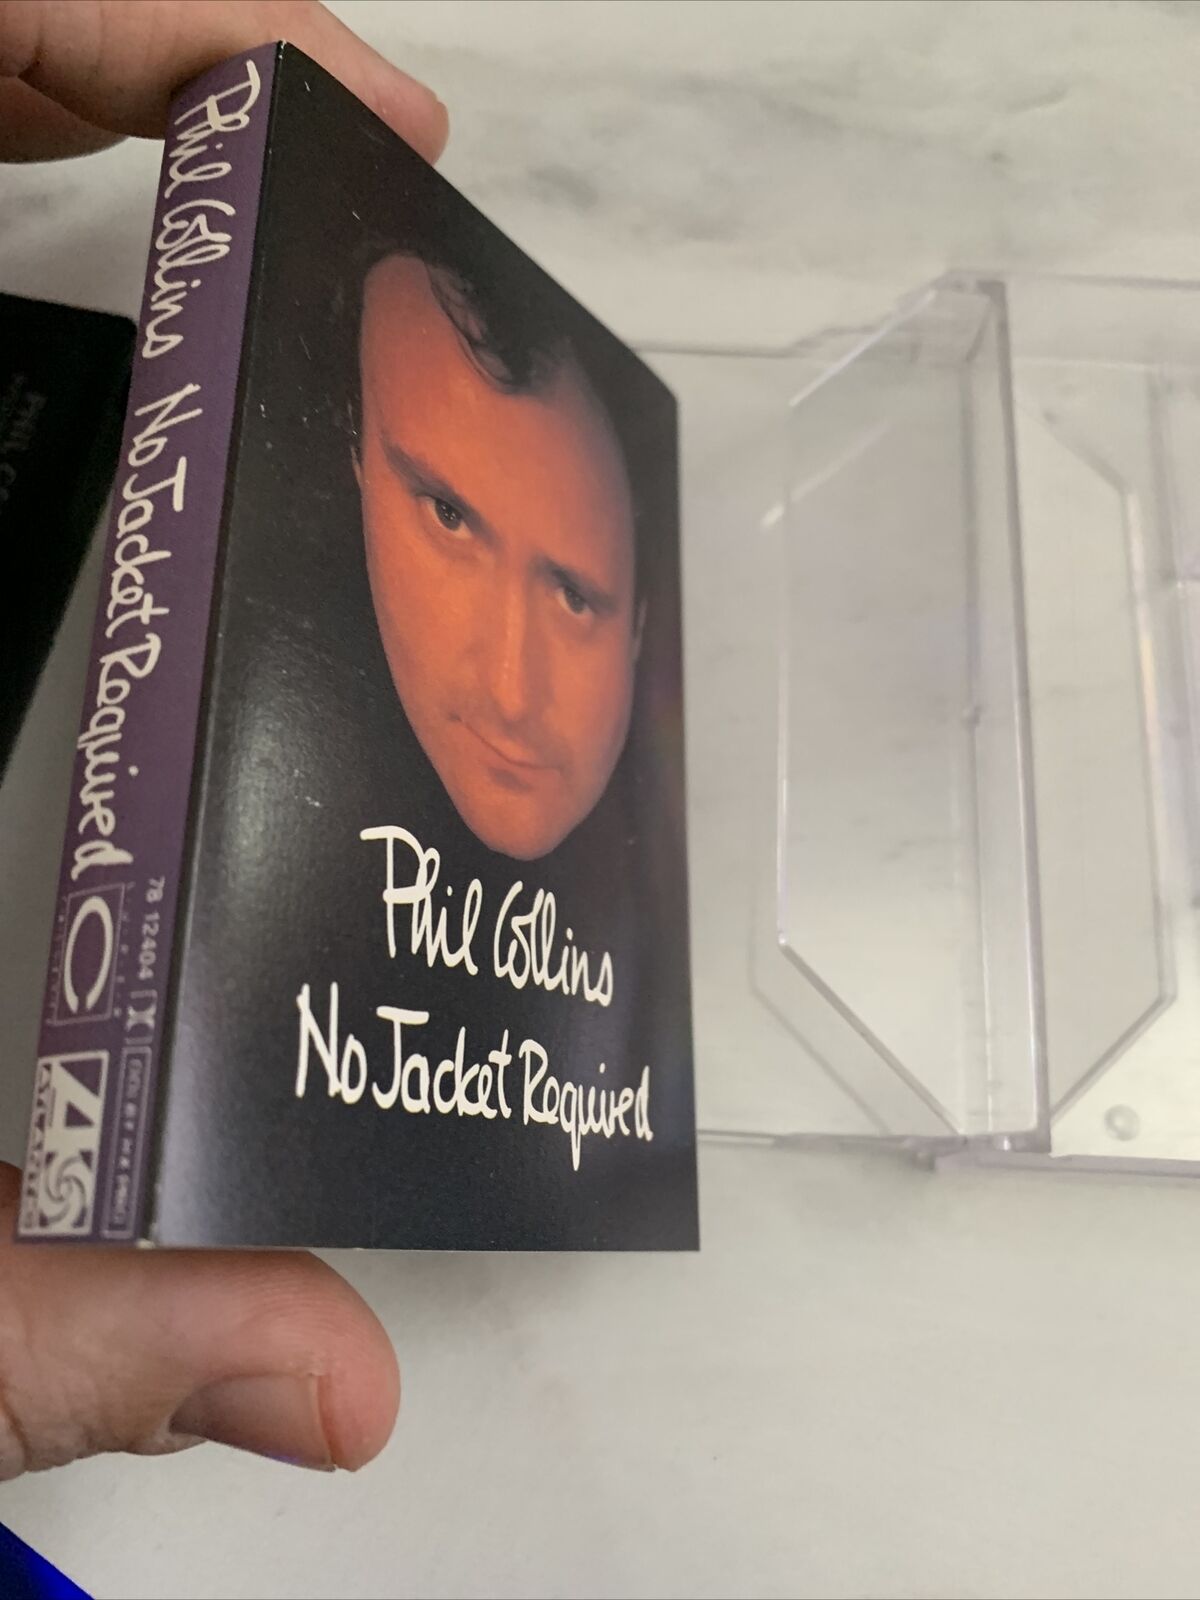 Phil Collins - No Jacket Required - Canada Cassette